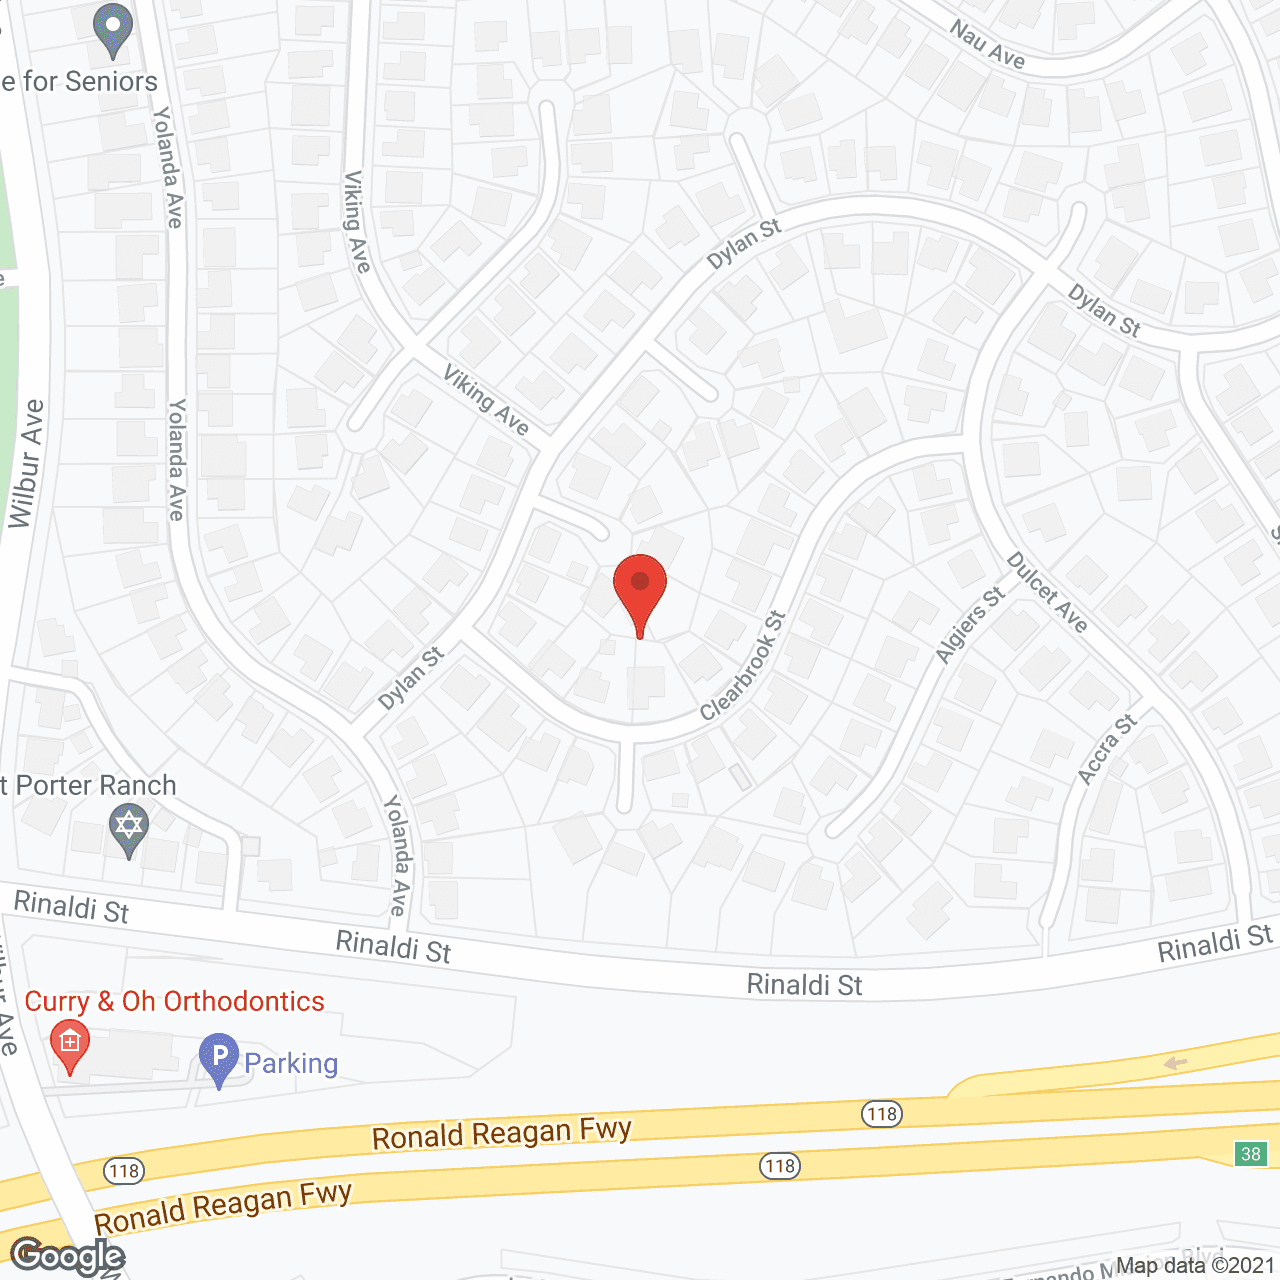 Around the Clock Home Service, LLC - Porter Ranch in google map